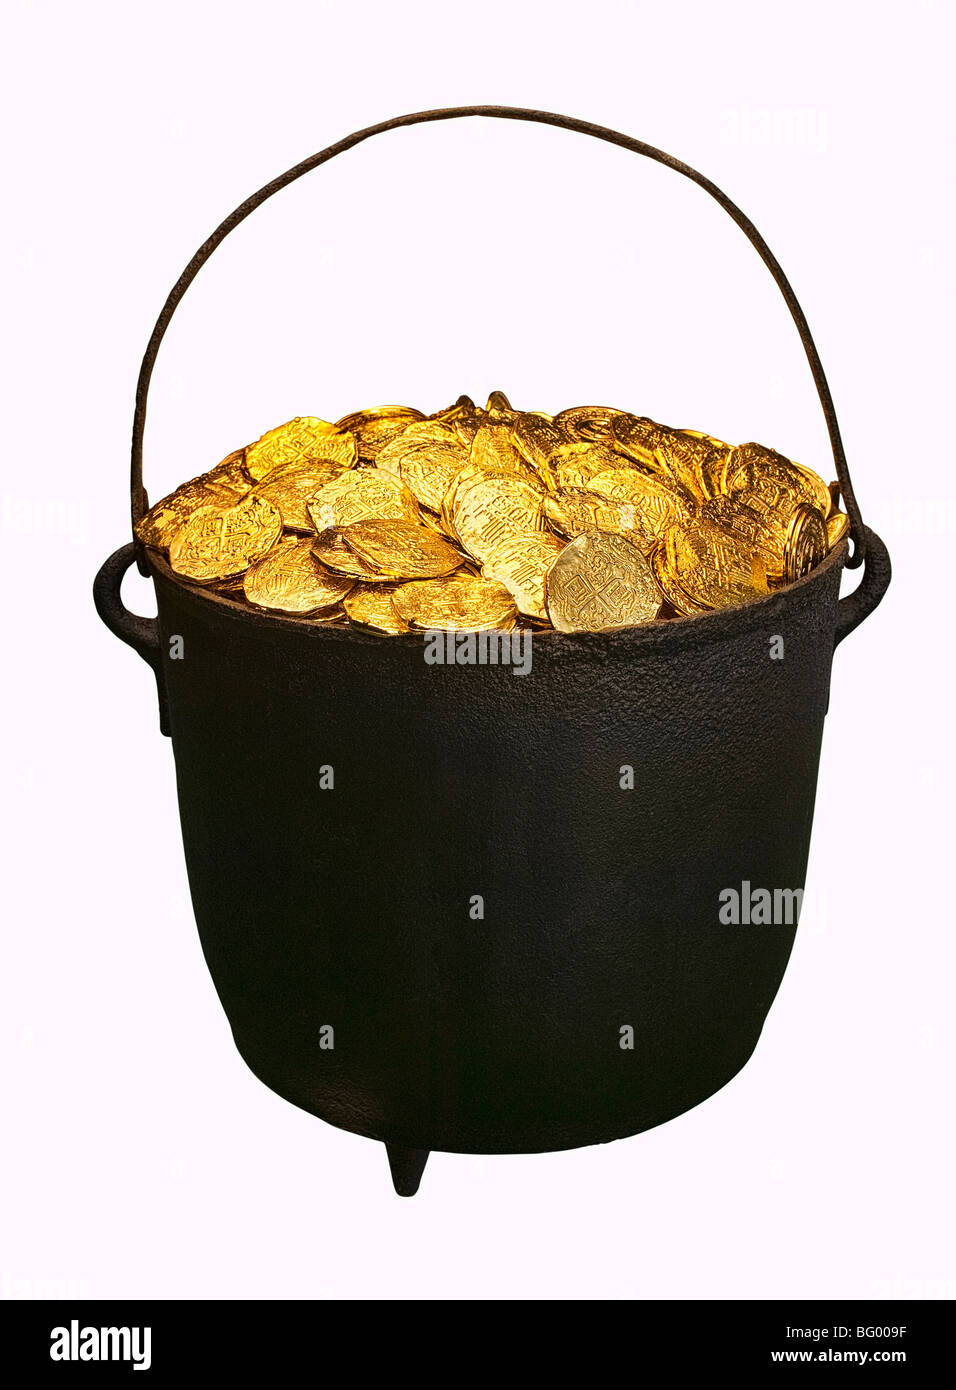 Caldron full of gold coins against a white background Stock Photo